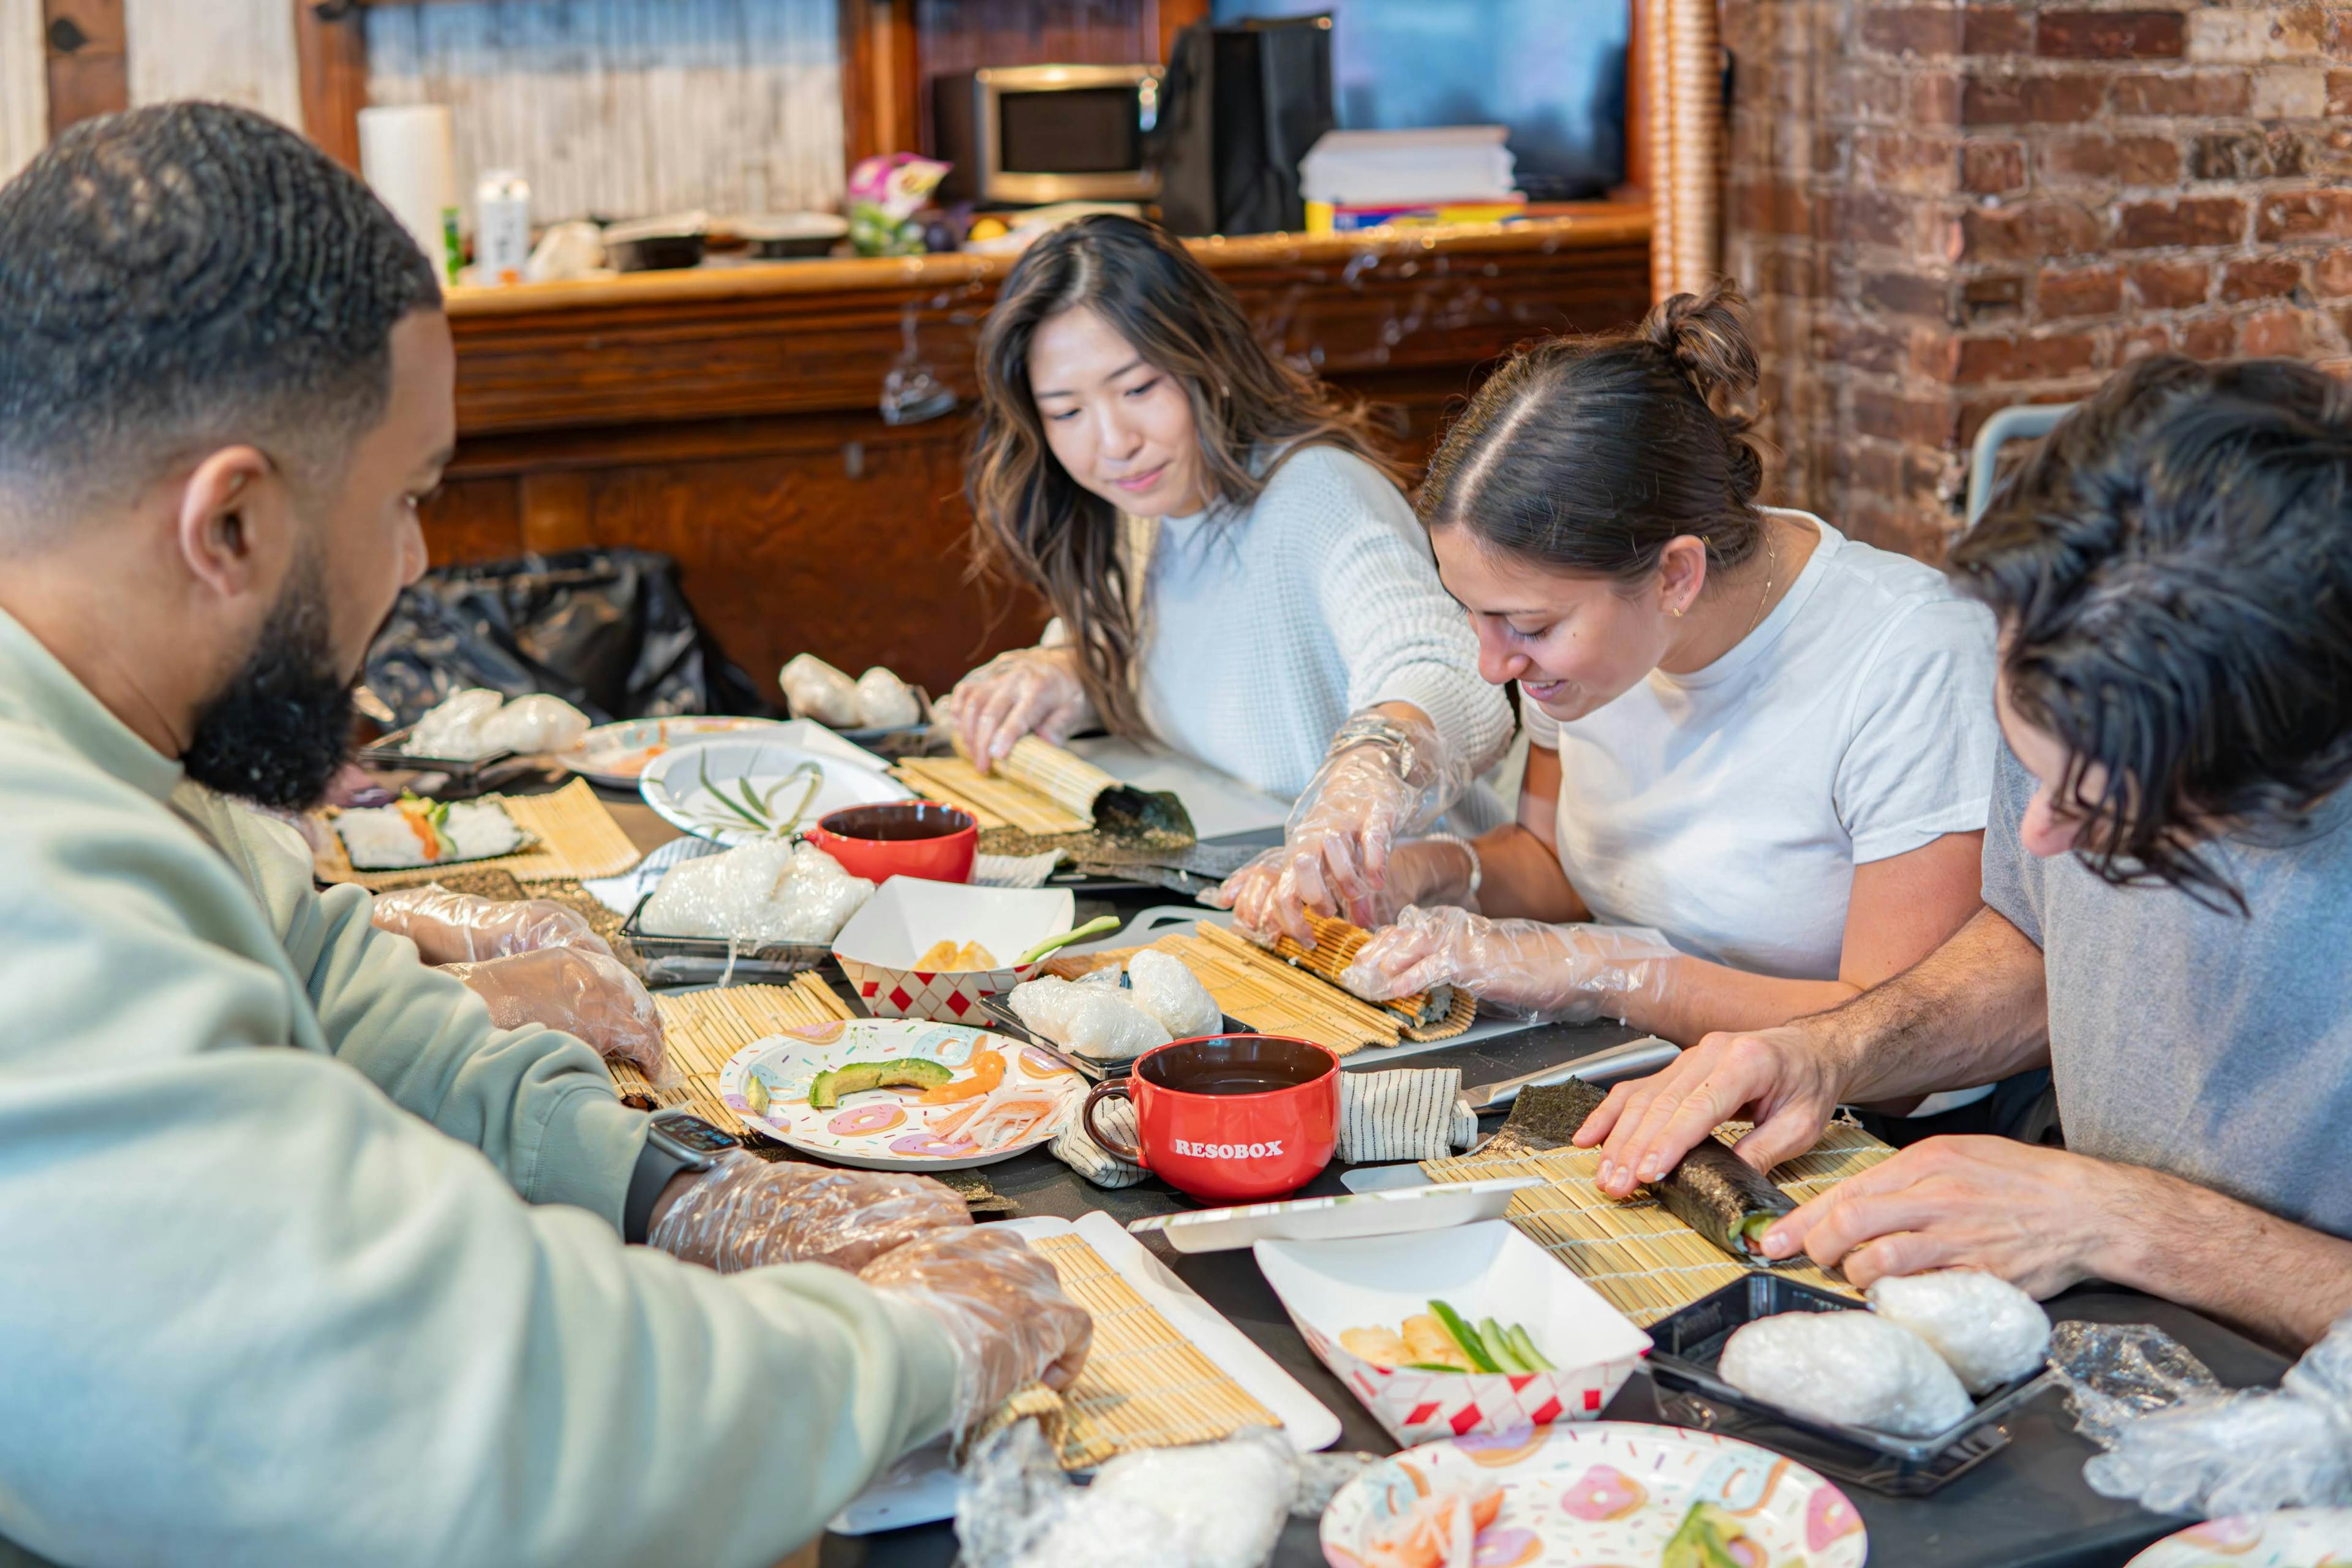 Four adults making sushi together using bamboo mats and various ingredients on a wooden table.